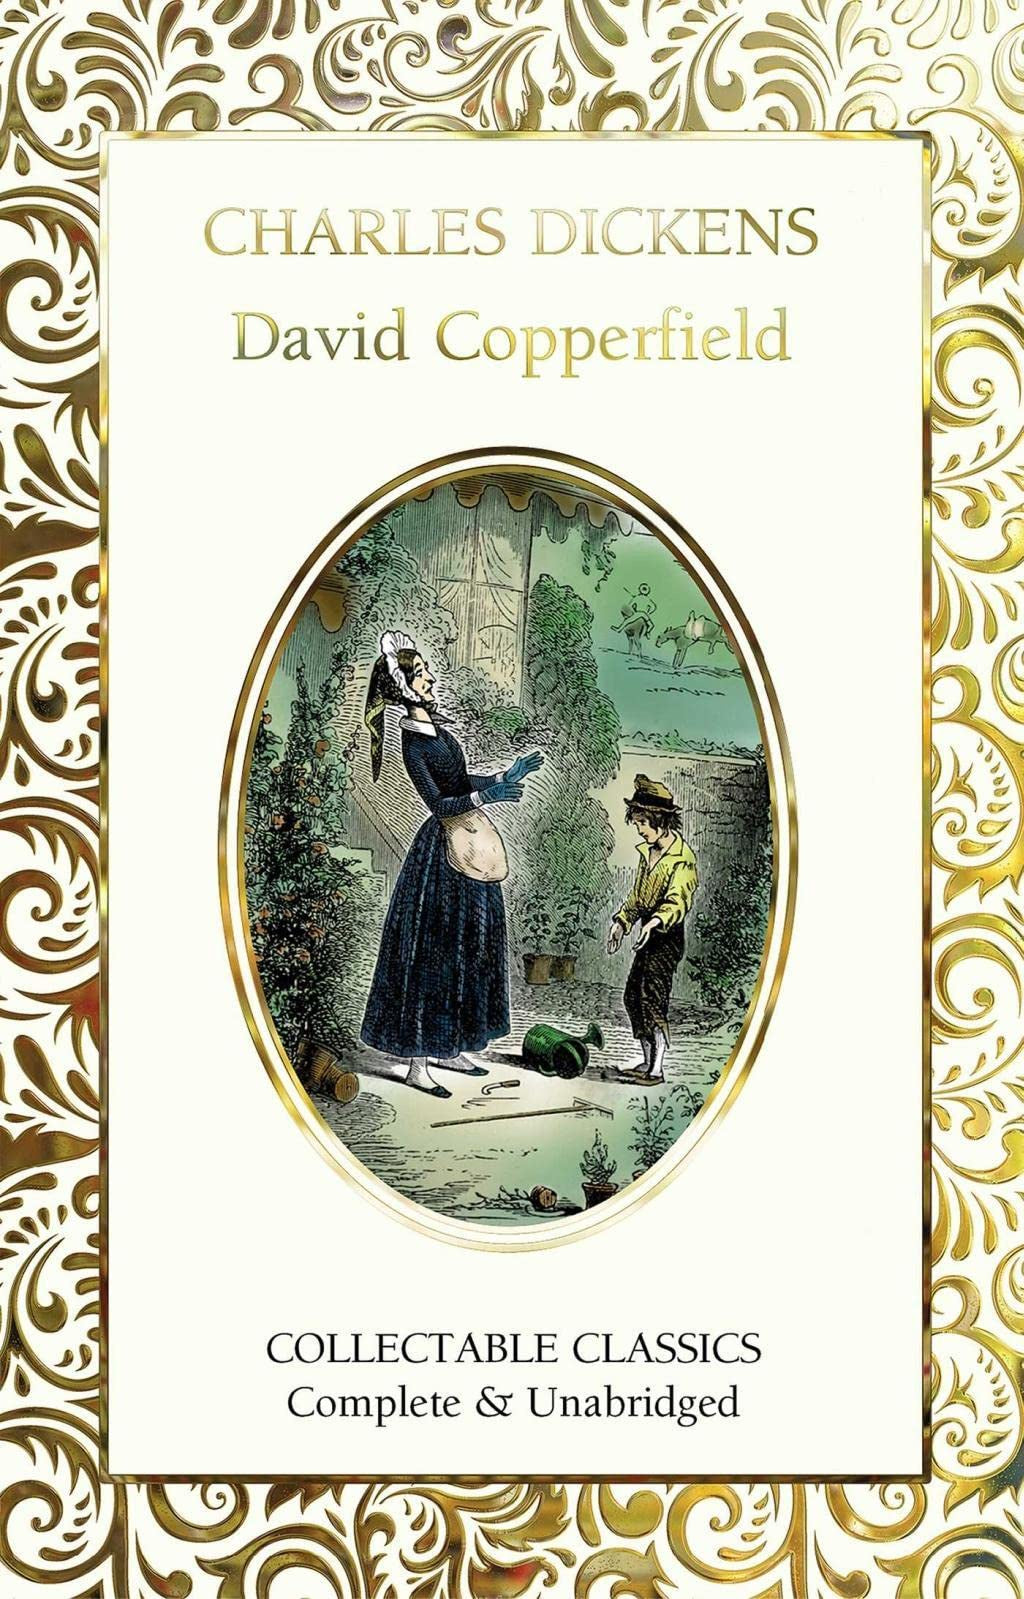 Collectable Classics: David Copperfield by Charles Dickens